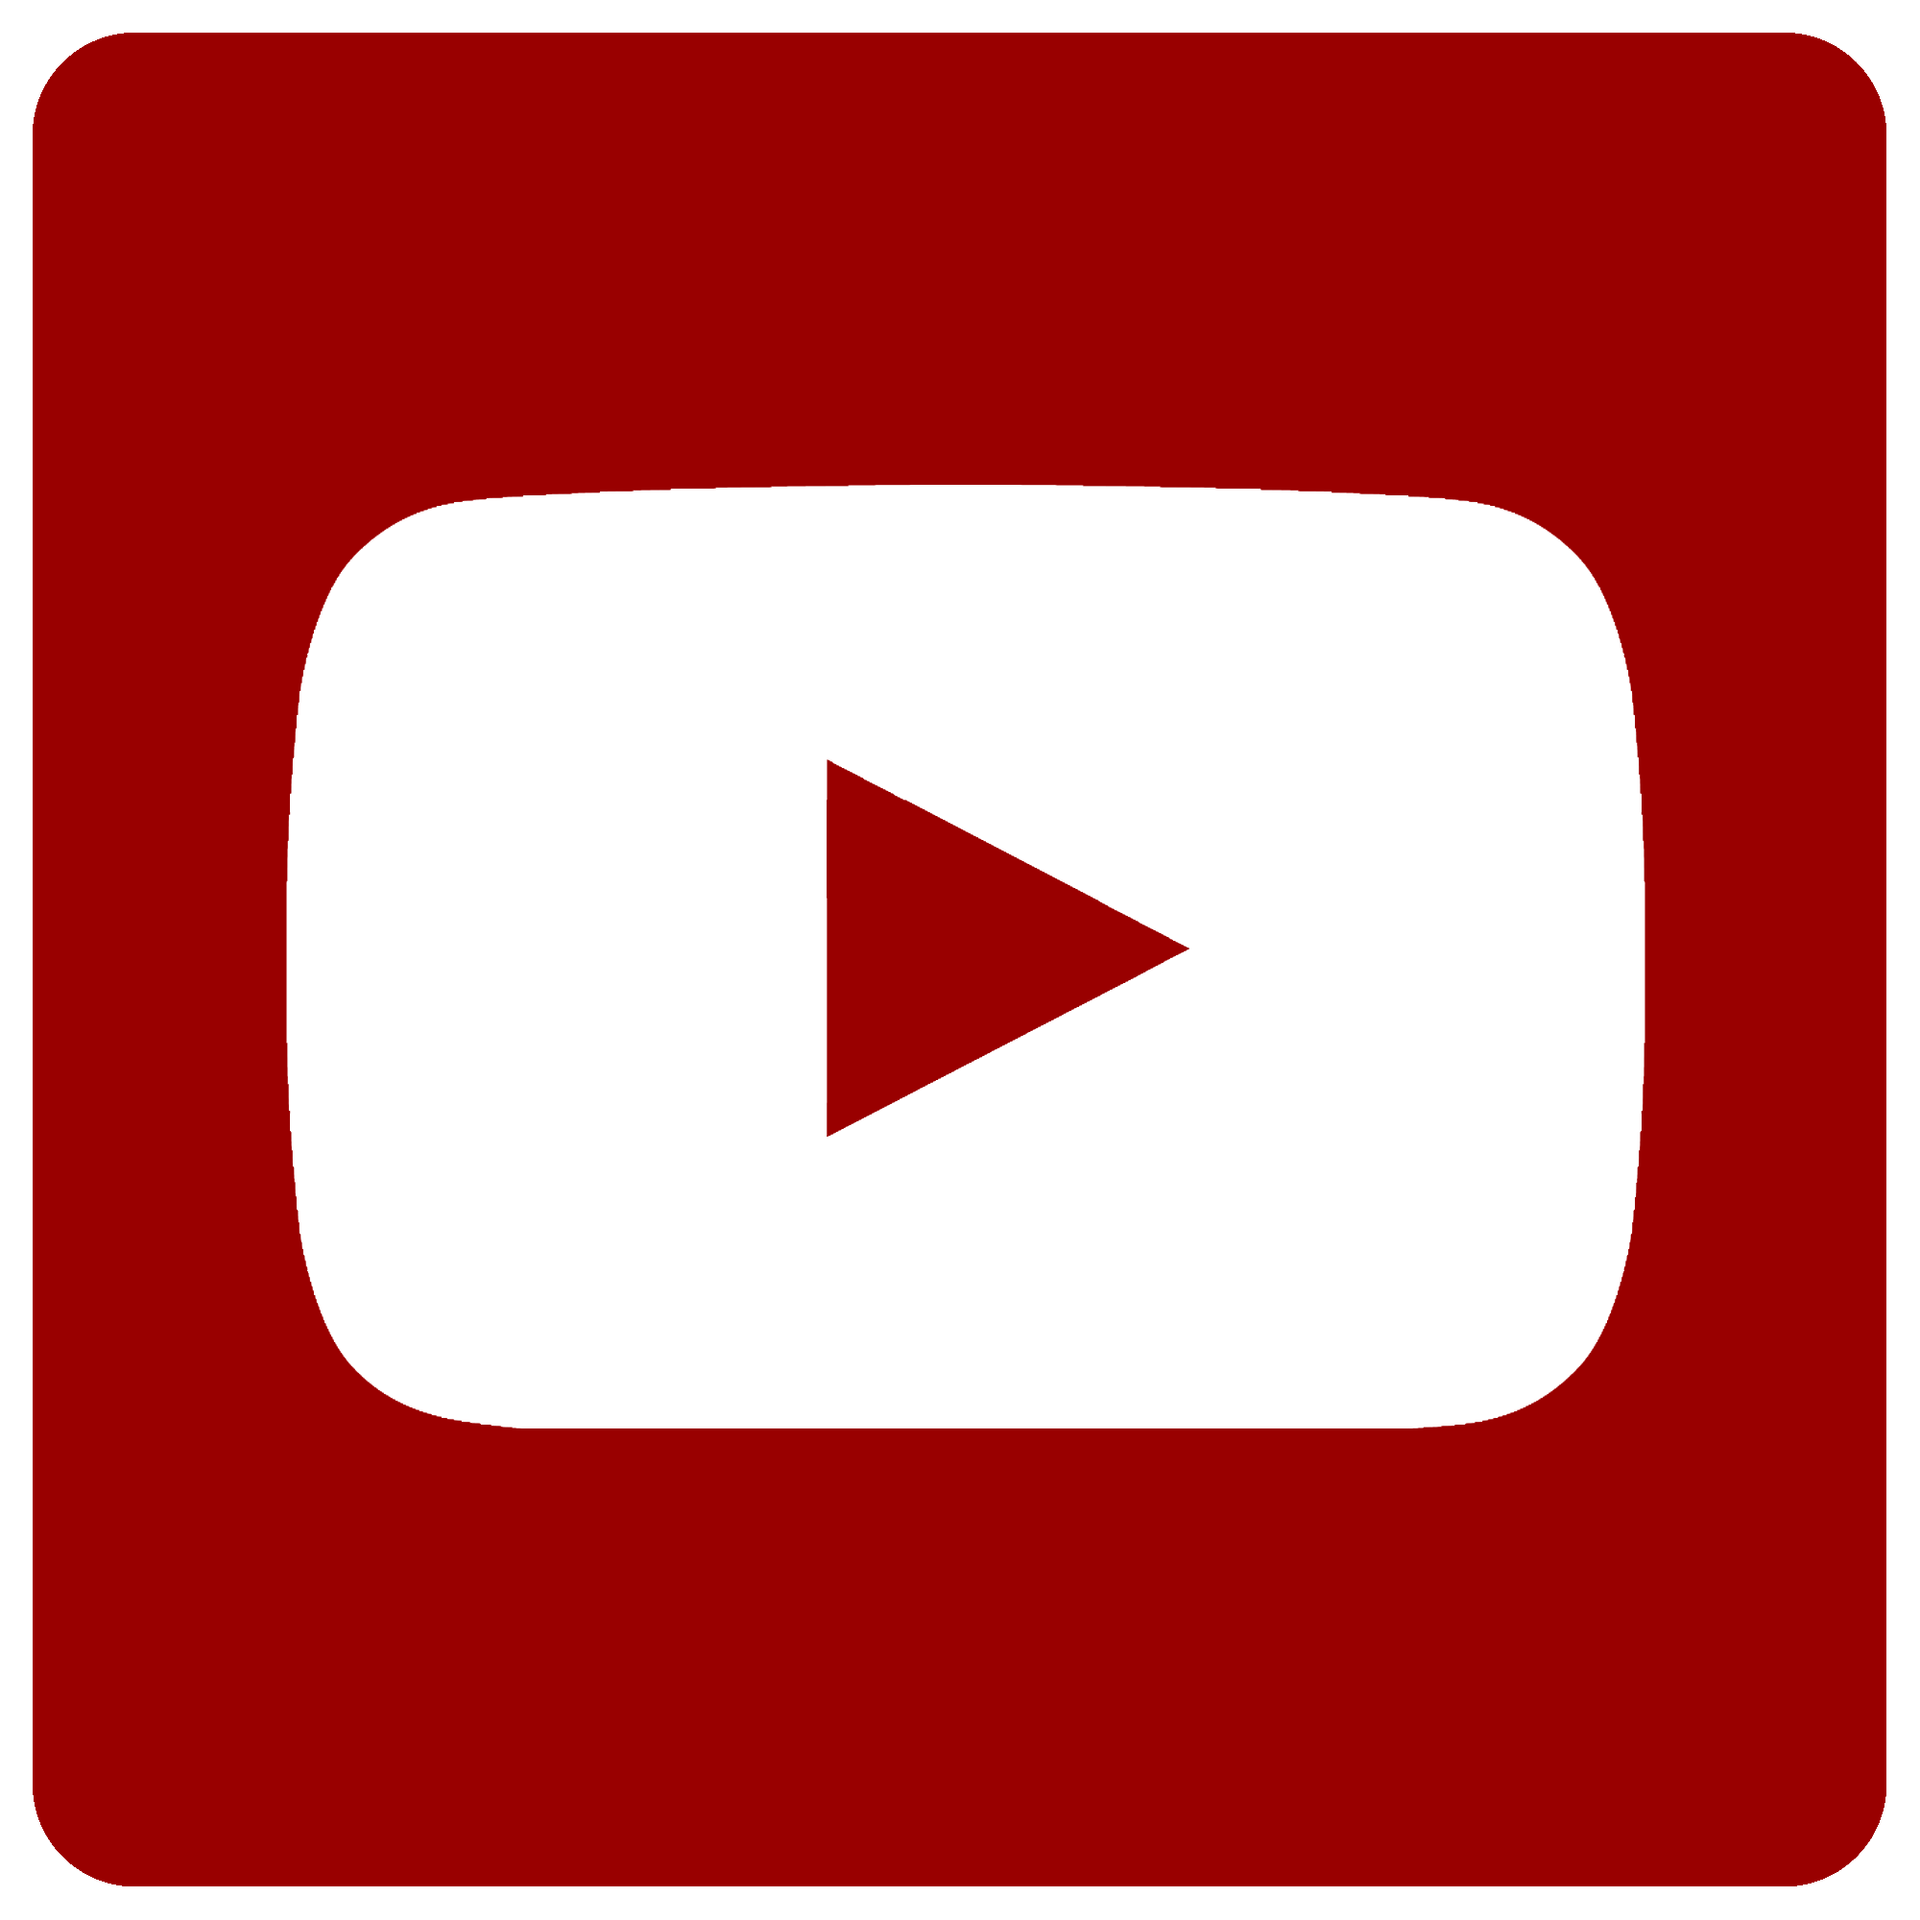 youtube-logo-red.png